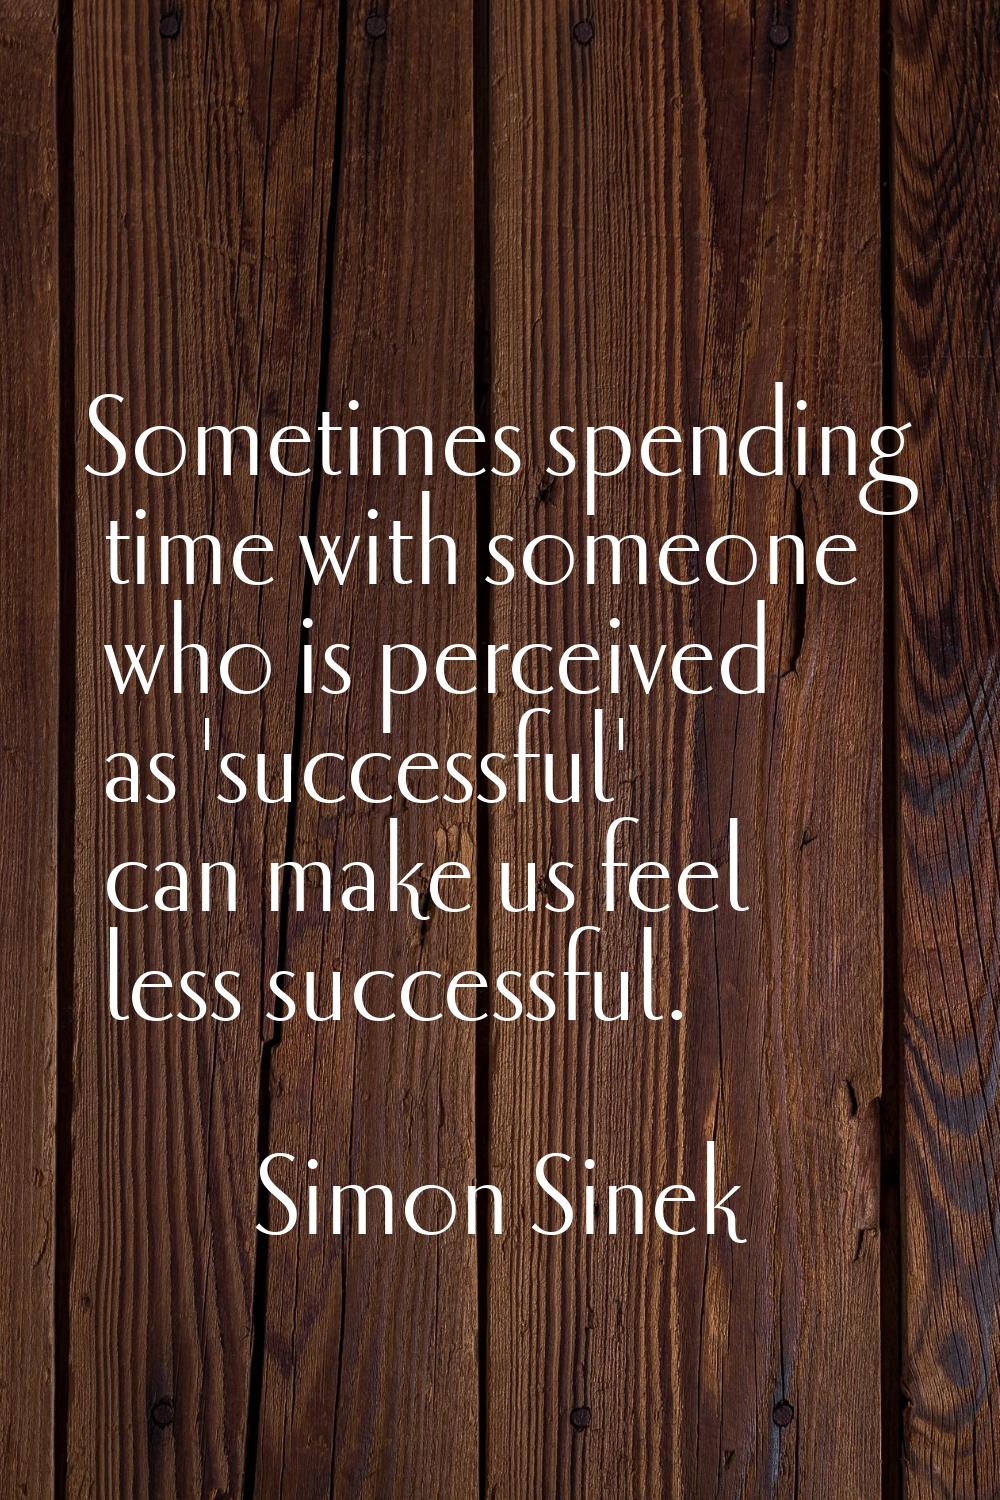 Sometimes spending time with someone who is perceived as 'successful' can make us feel less success